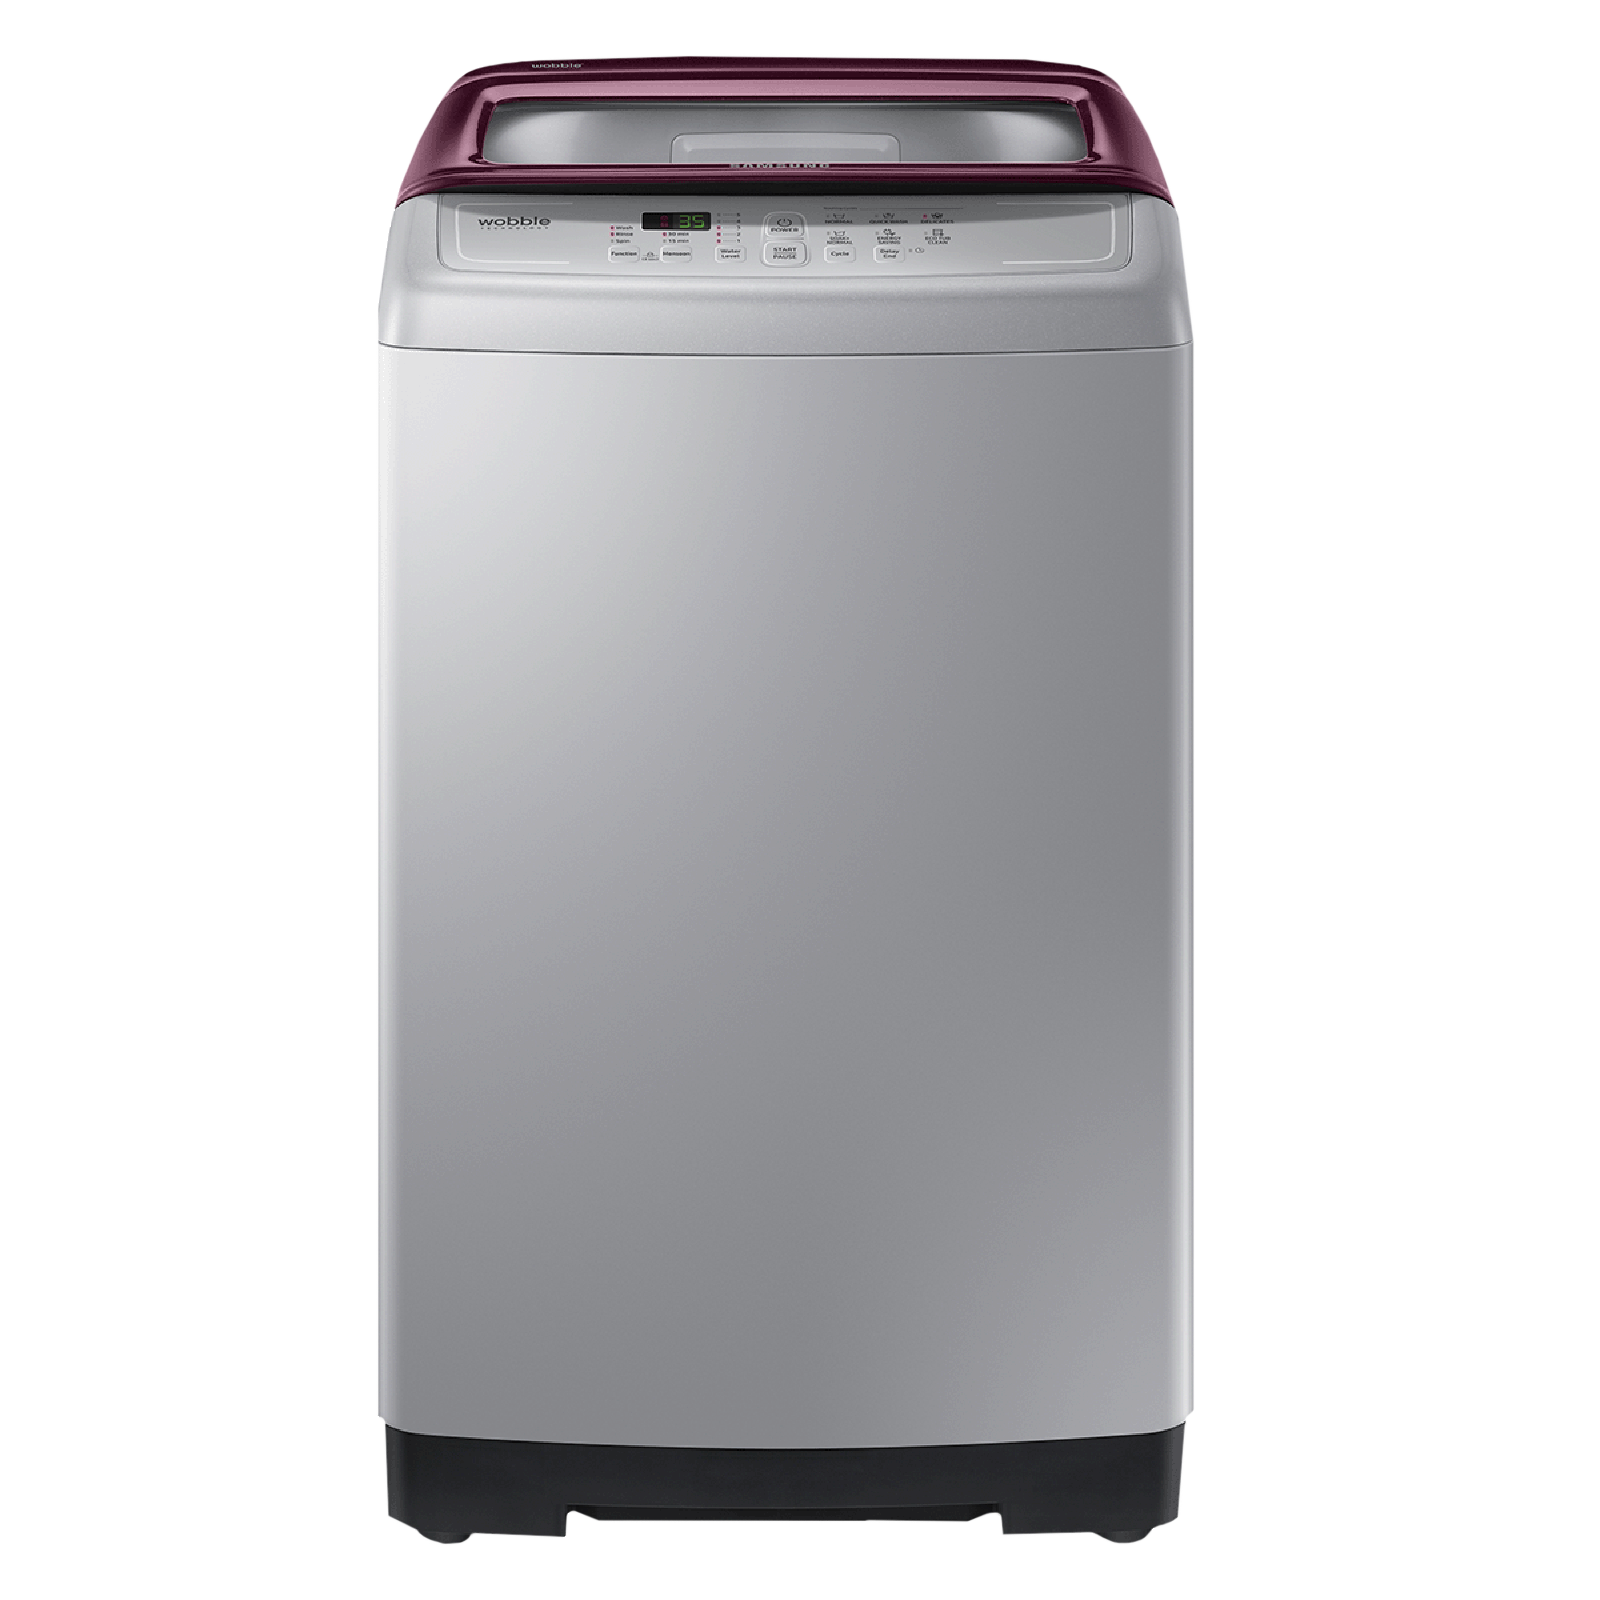 SAMSUNG 6.5 kg Fully Automatic Top Load Washing Machine (WA65A4022FS/TL, Magic Filter, Imperial Silver)_1